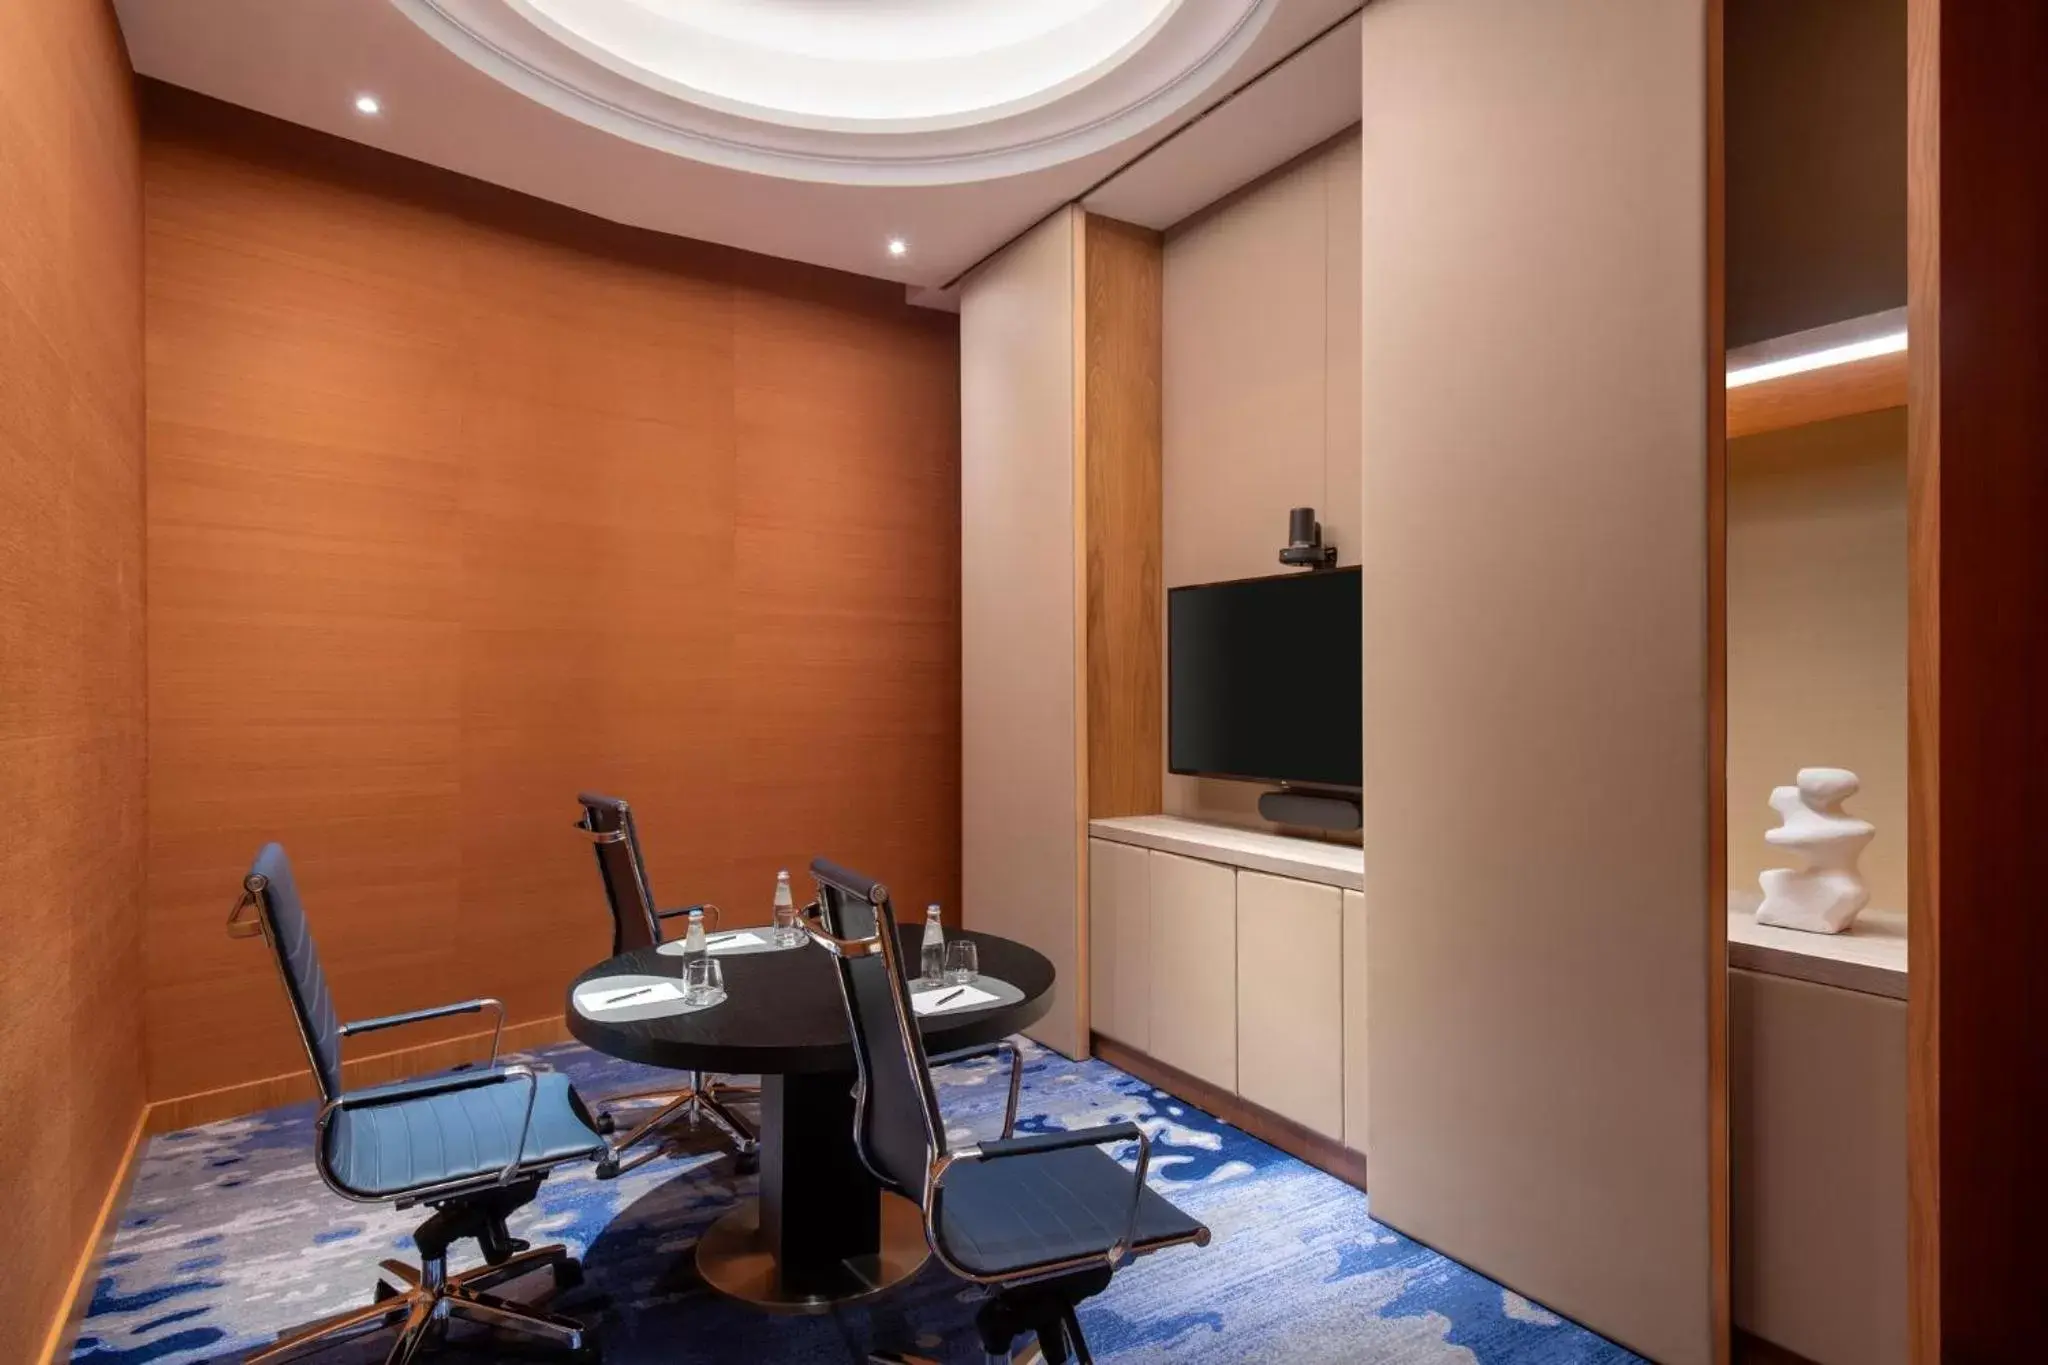 Meeting/conference room in Abesq Doha Hotel and Residences